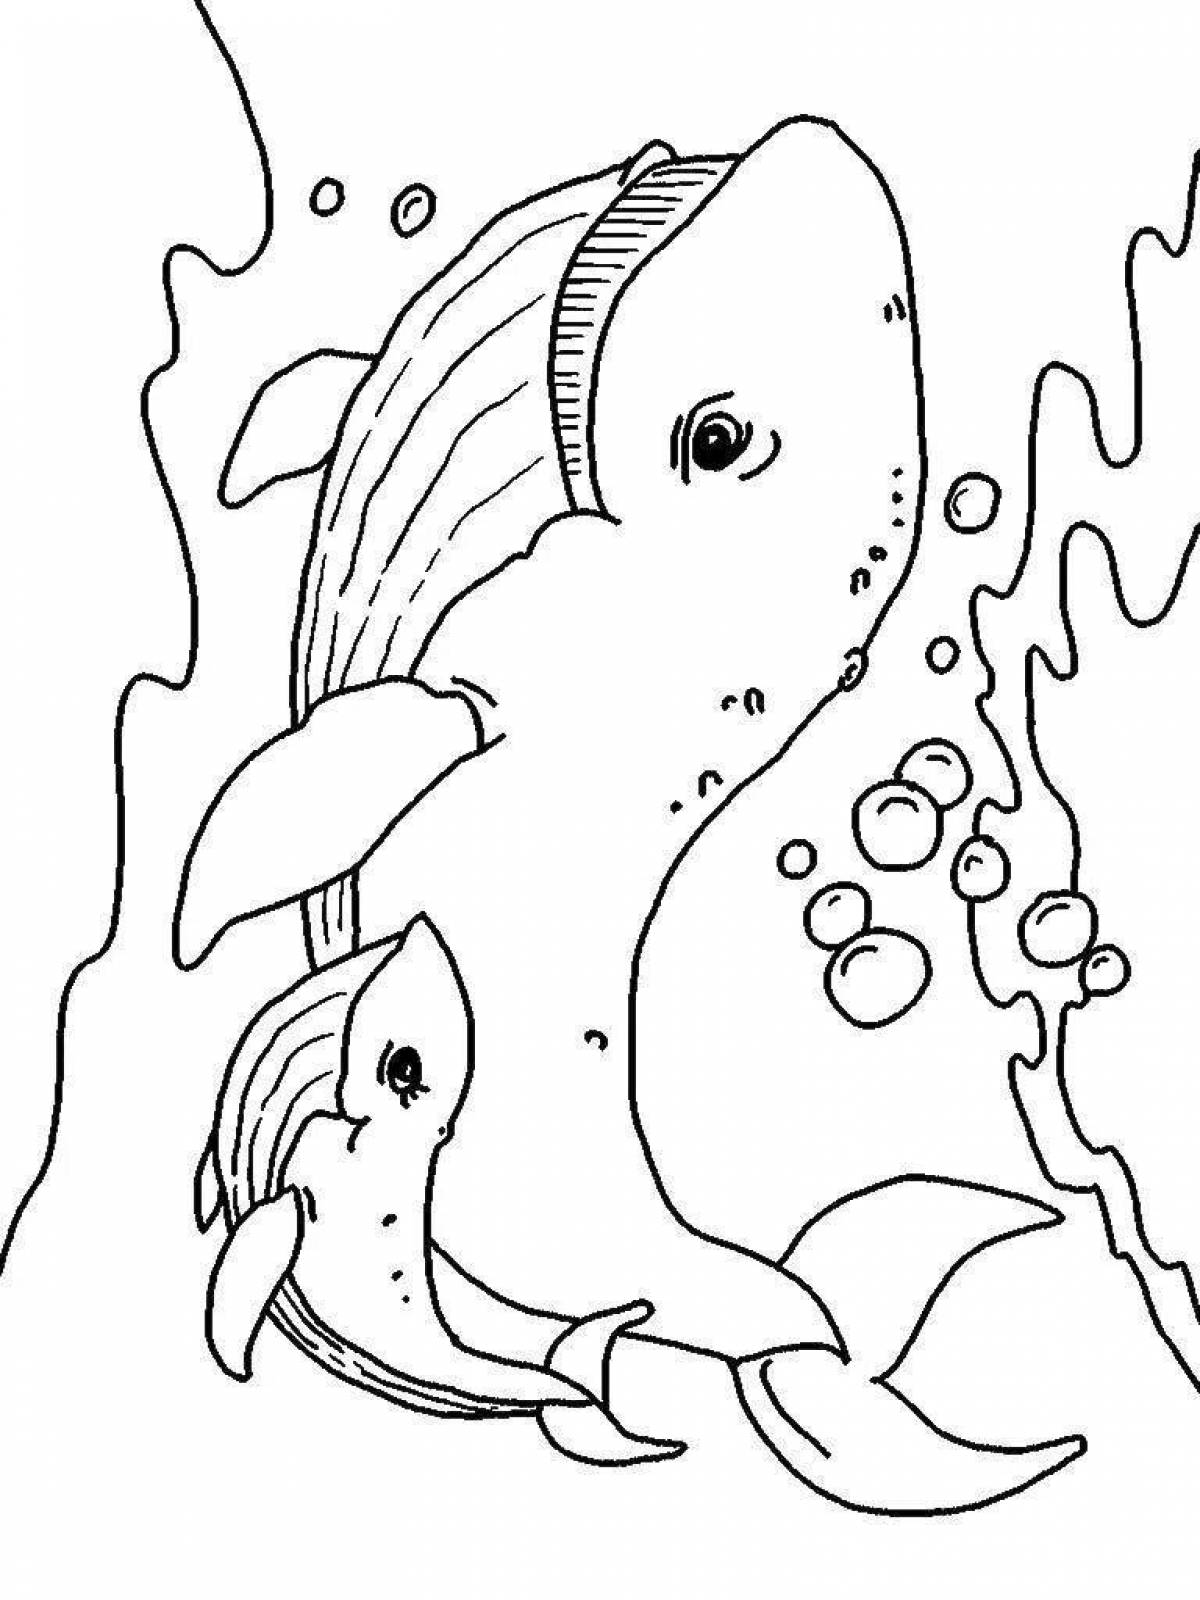 Violent marine life coloring book for children 5-6 years old